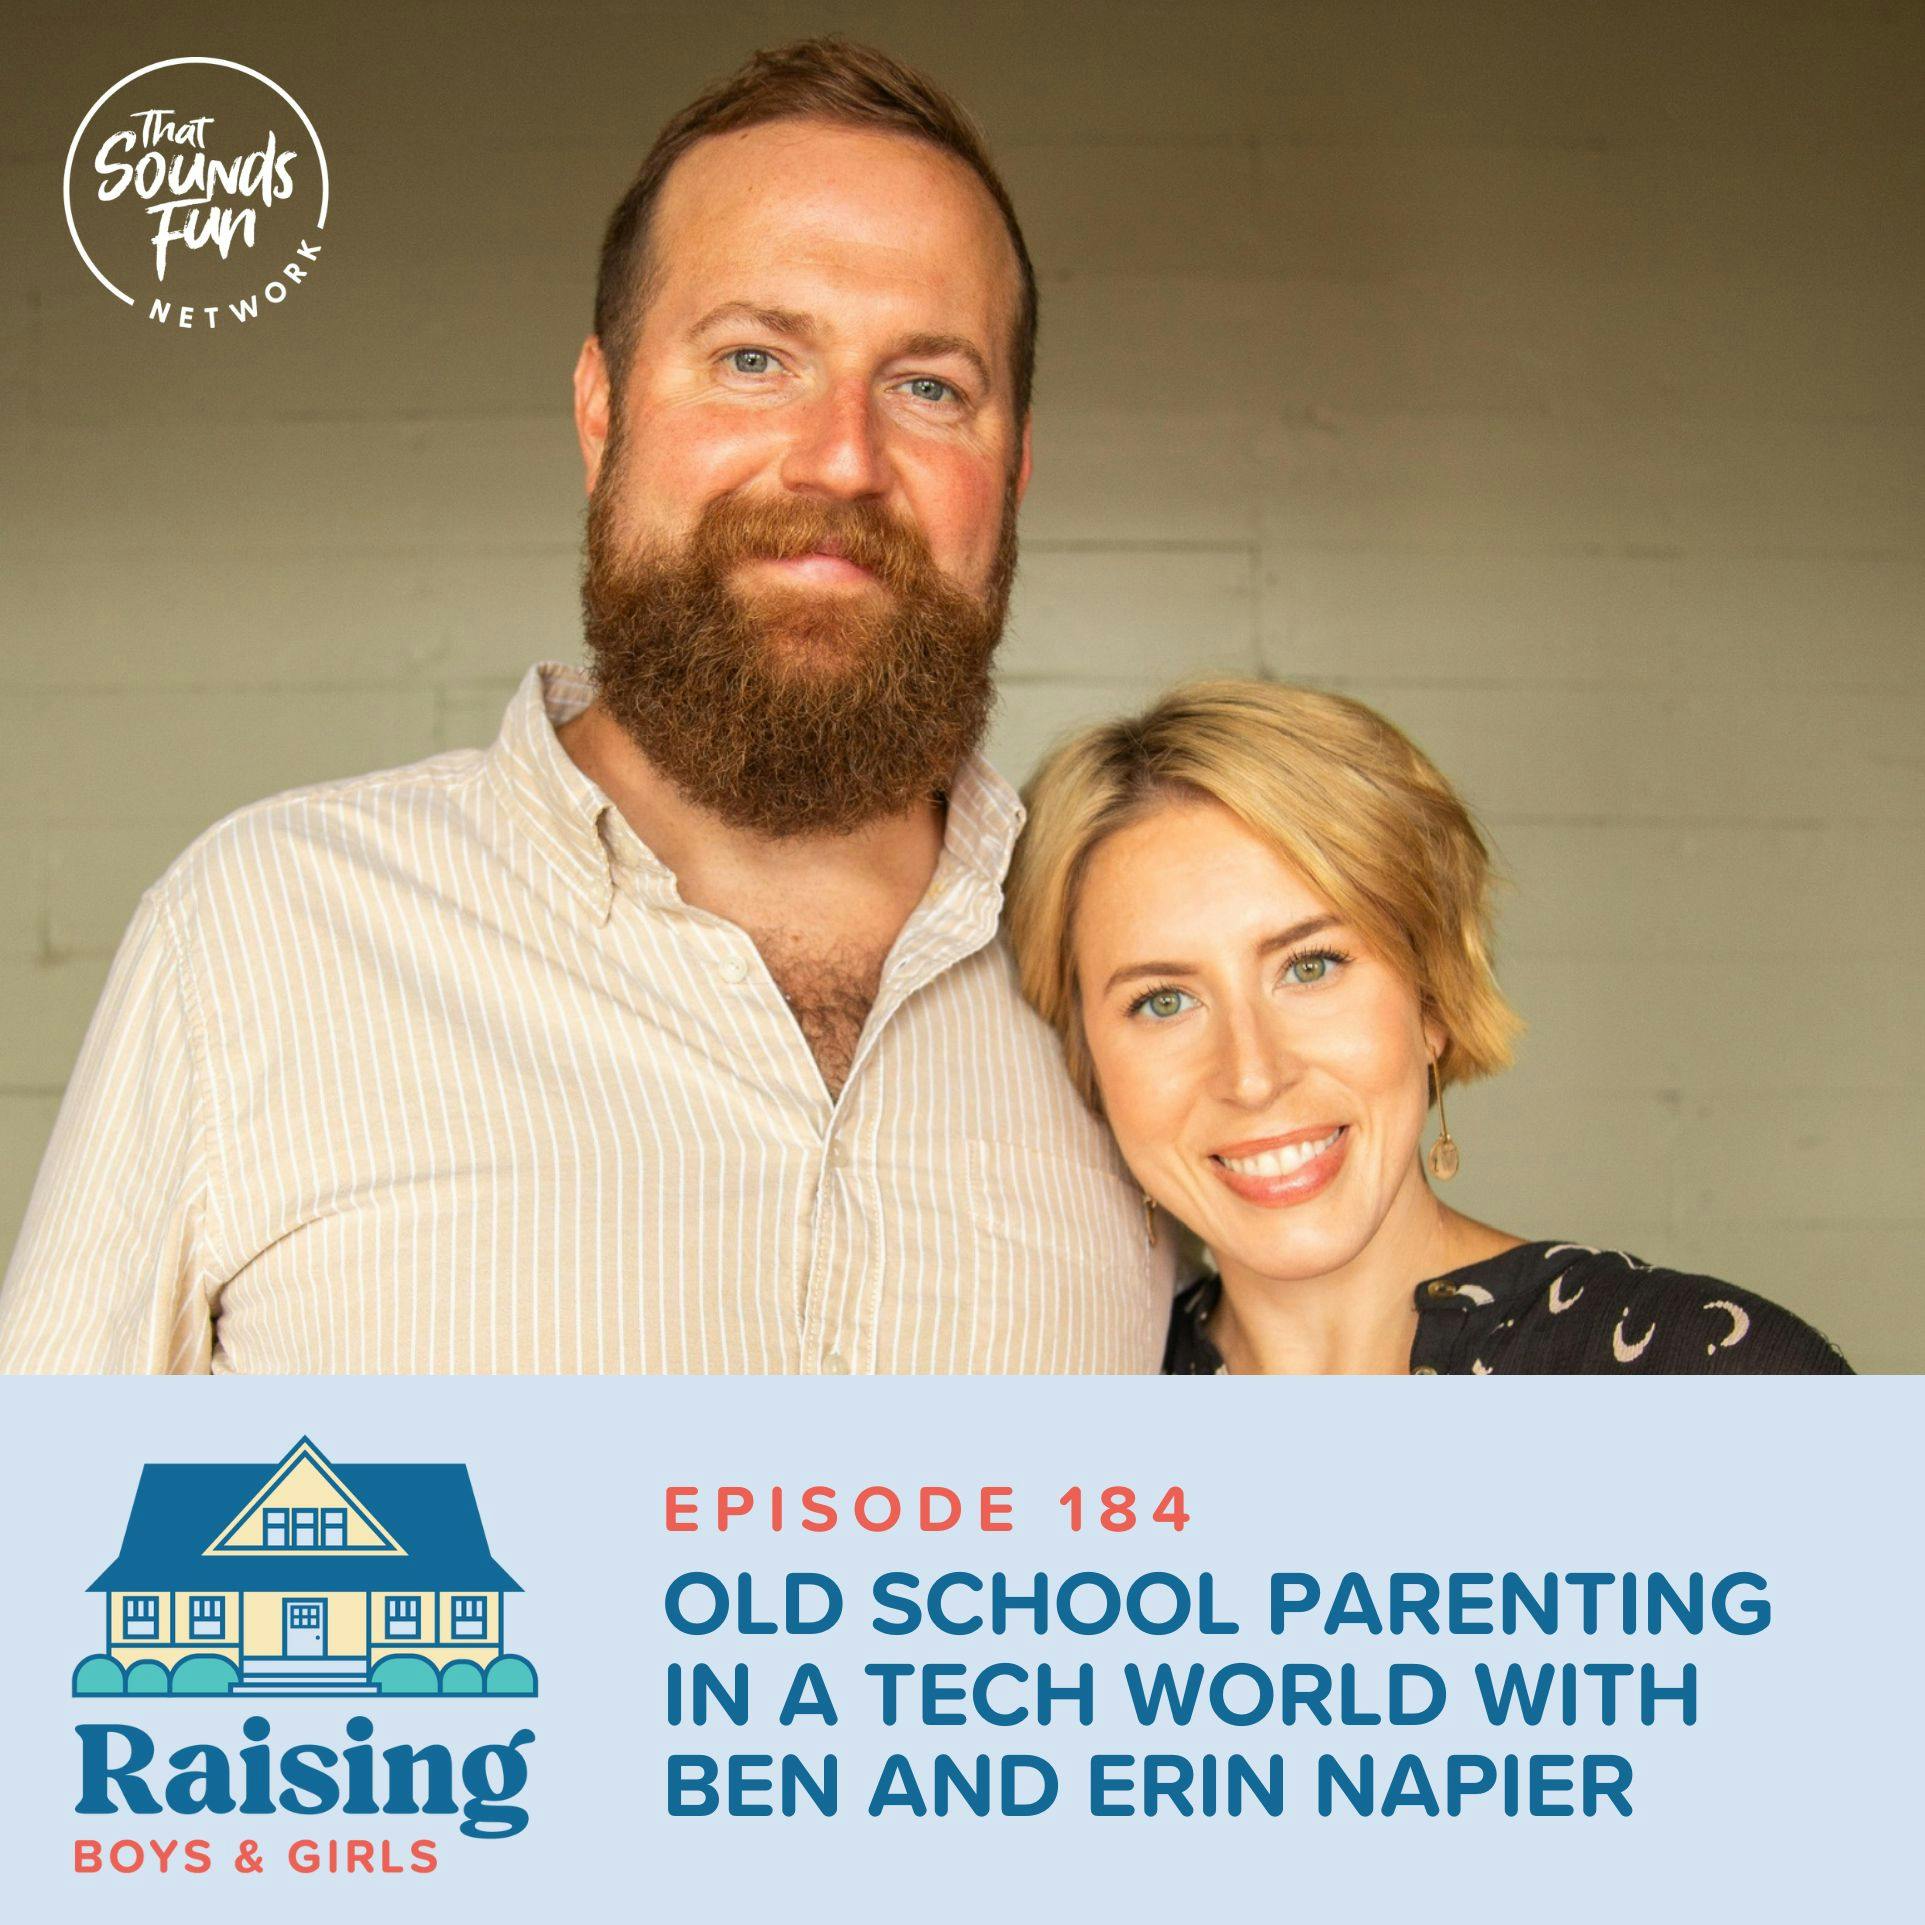 Episode 184: Old School Parenting in a Tech World with Ben and Erin Napier